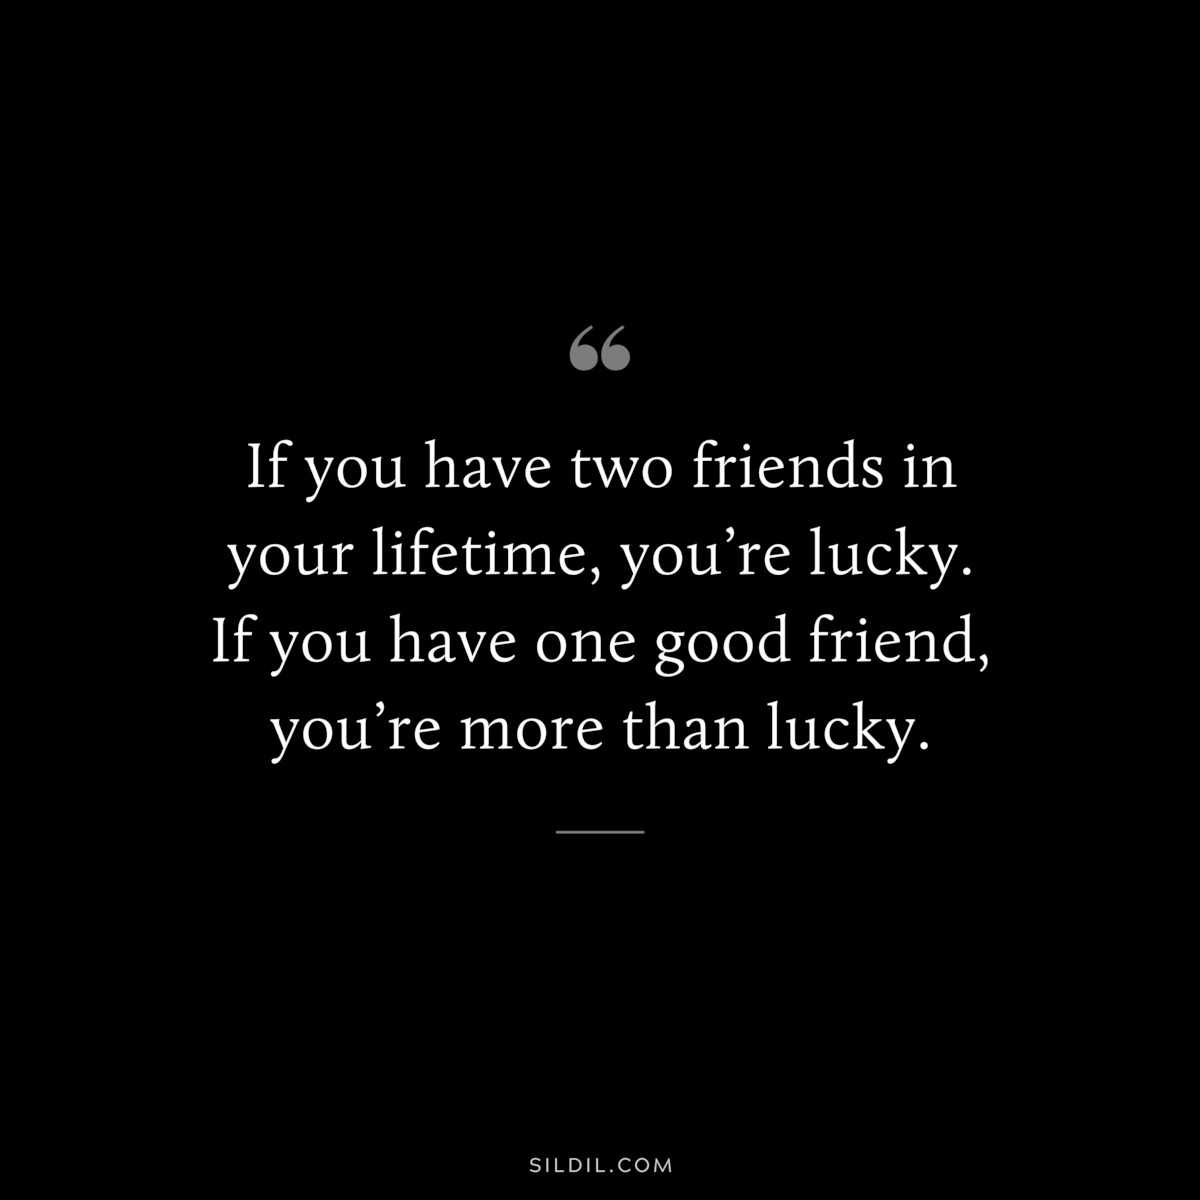 If you have two friends in your lifetime, you’re lucky. If you have one good friend, you’re more than lucky.